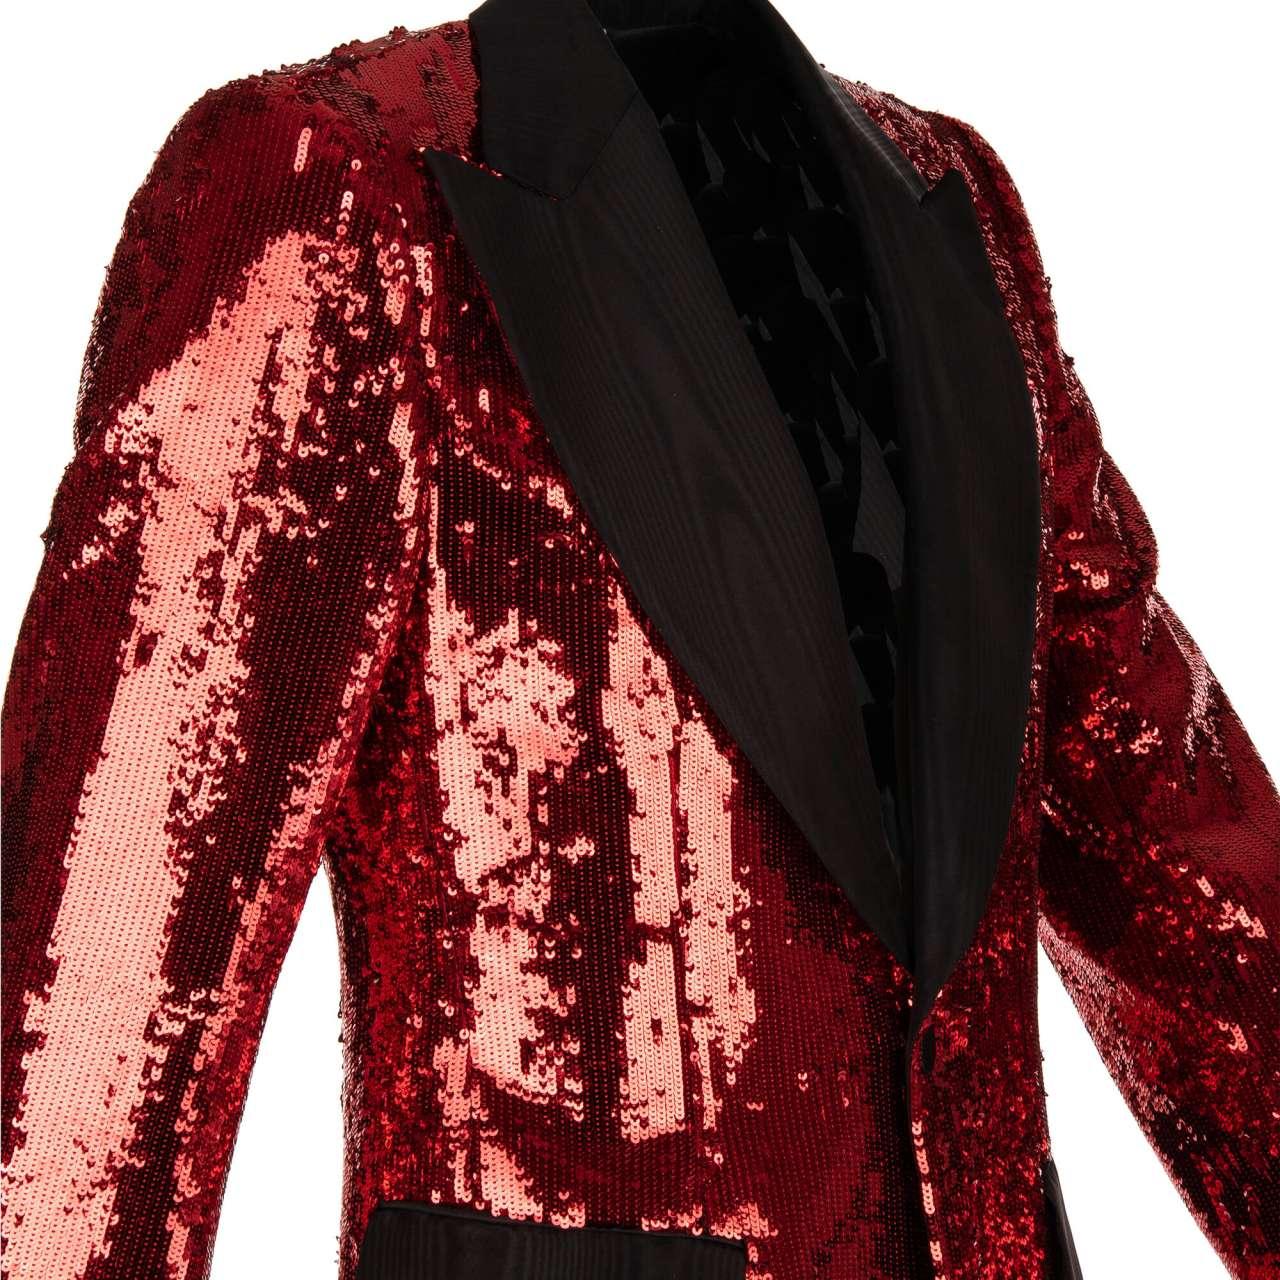 Dolce & Gabbana - Sequined Tuxedo Blazer with Moire Lapel Red Black 50 For Sale 1